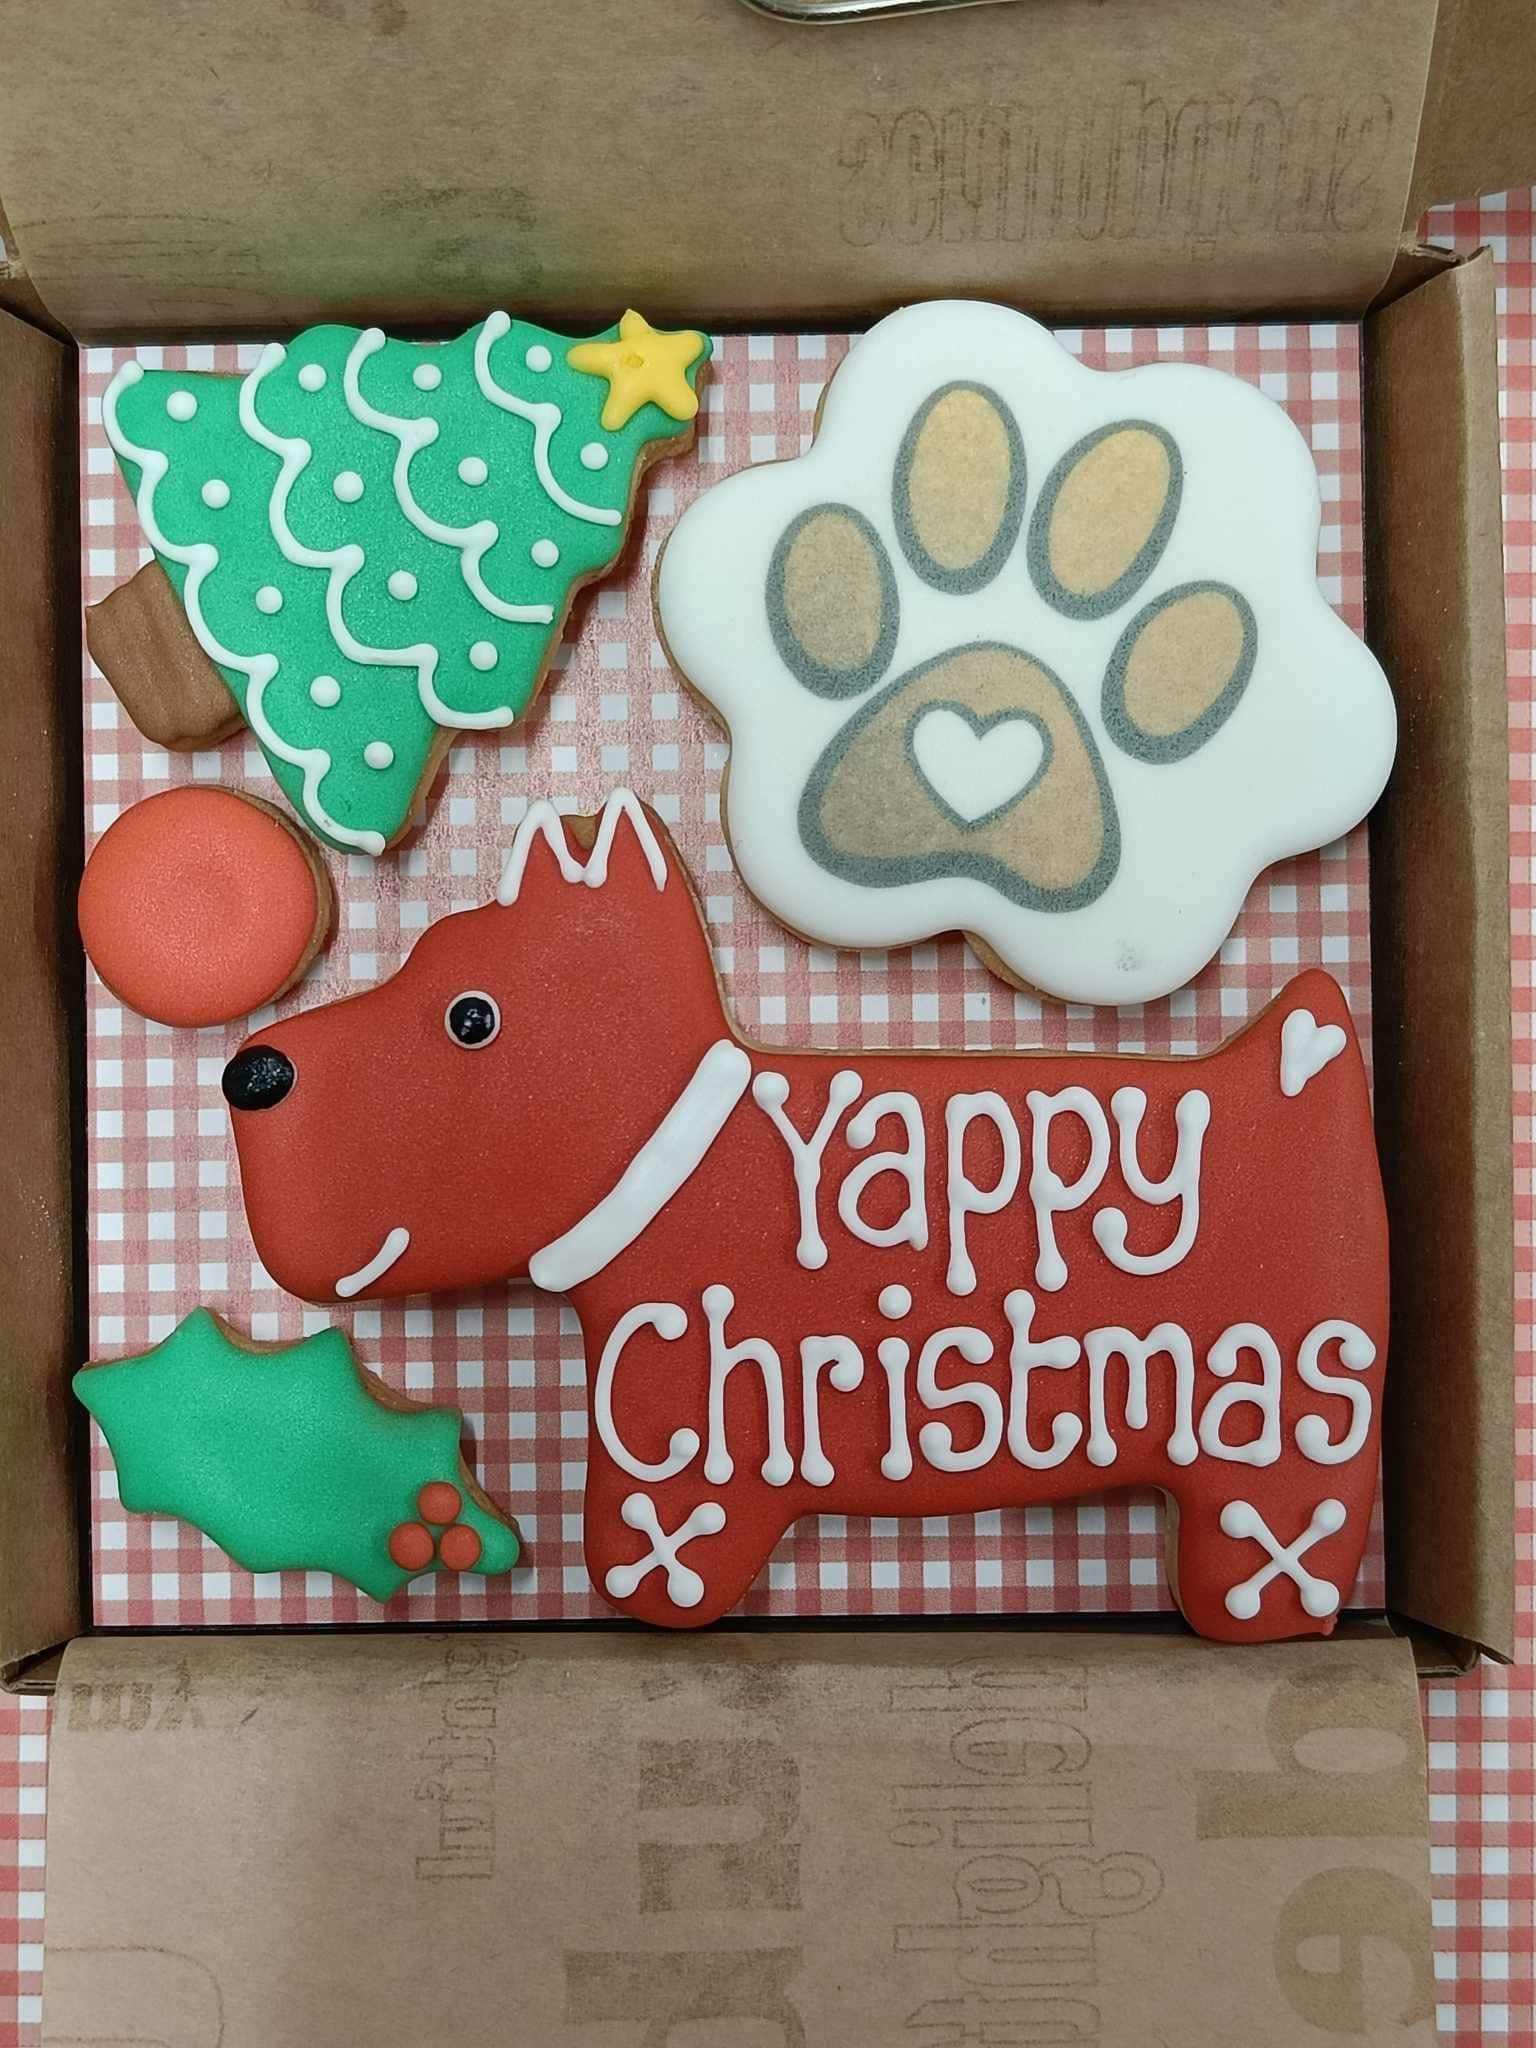 With love from the Dog Christmas Cookie Card - A Little box of Christmas Joy